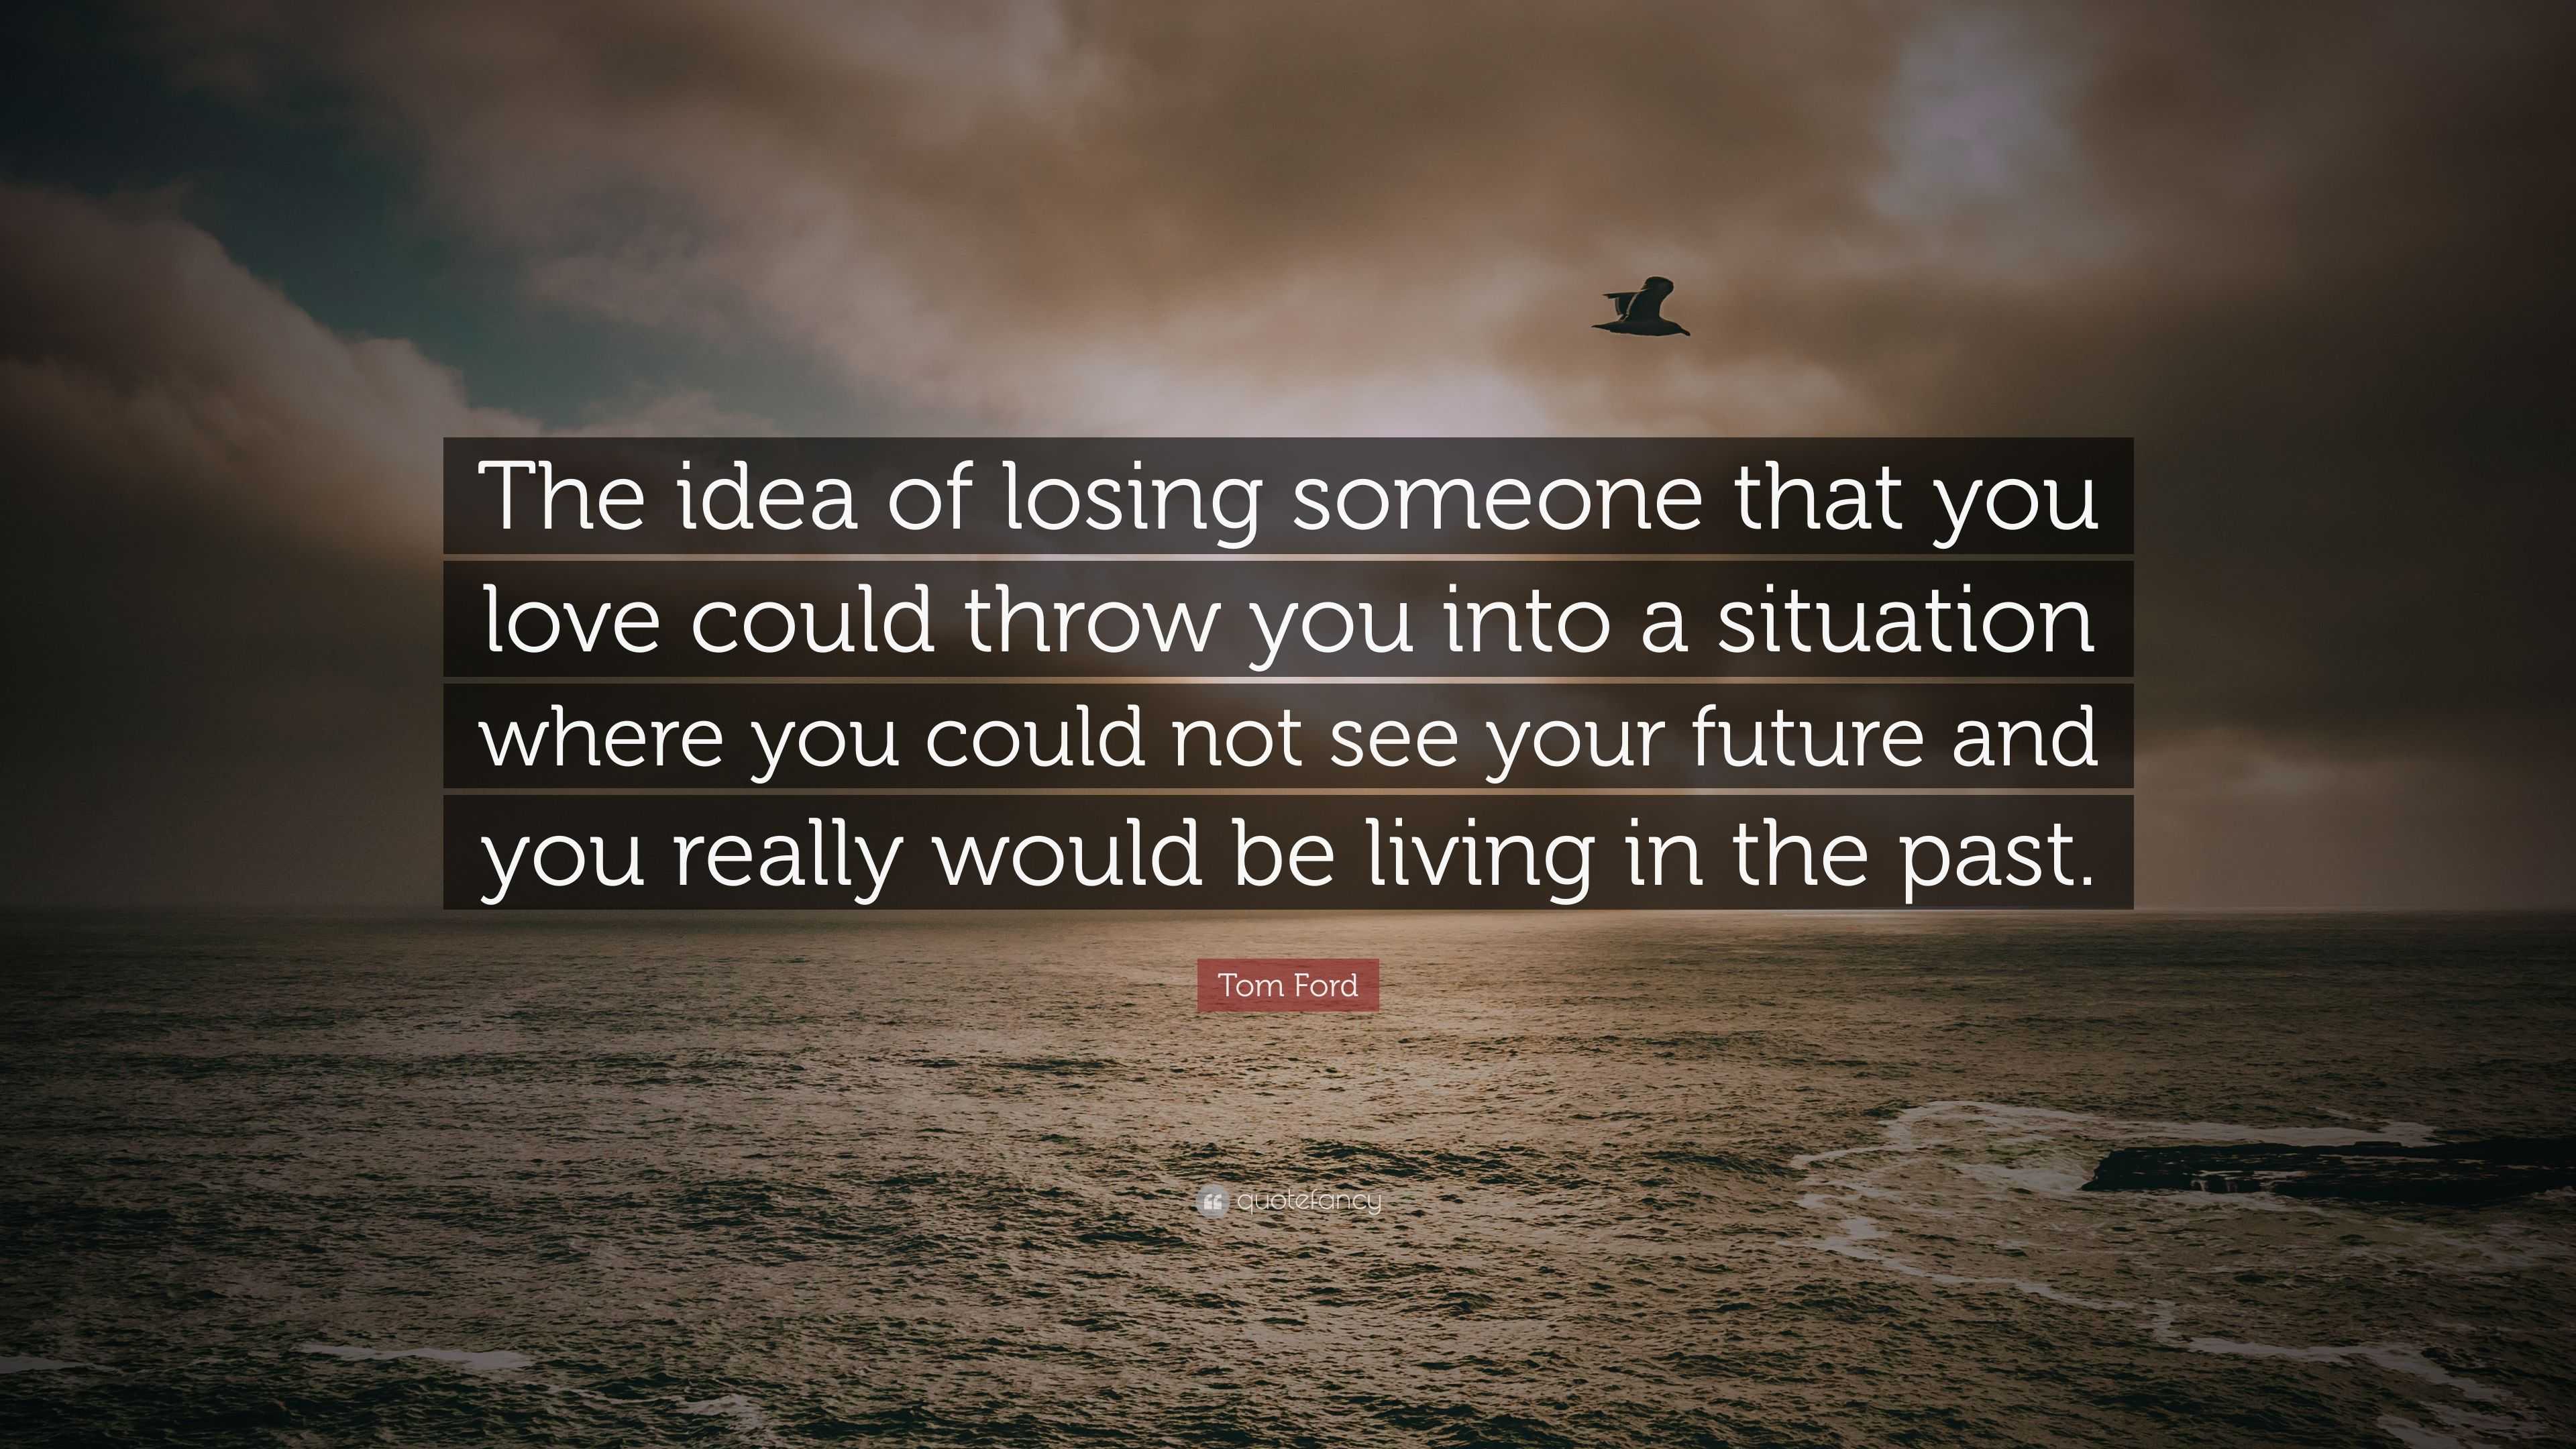 Tom Ford Quote “The idea of losing someone that you love could throw you